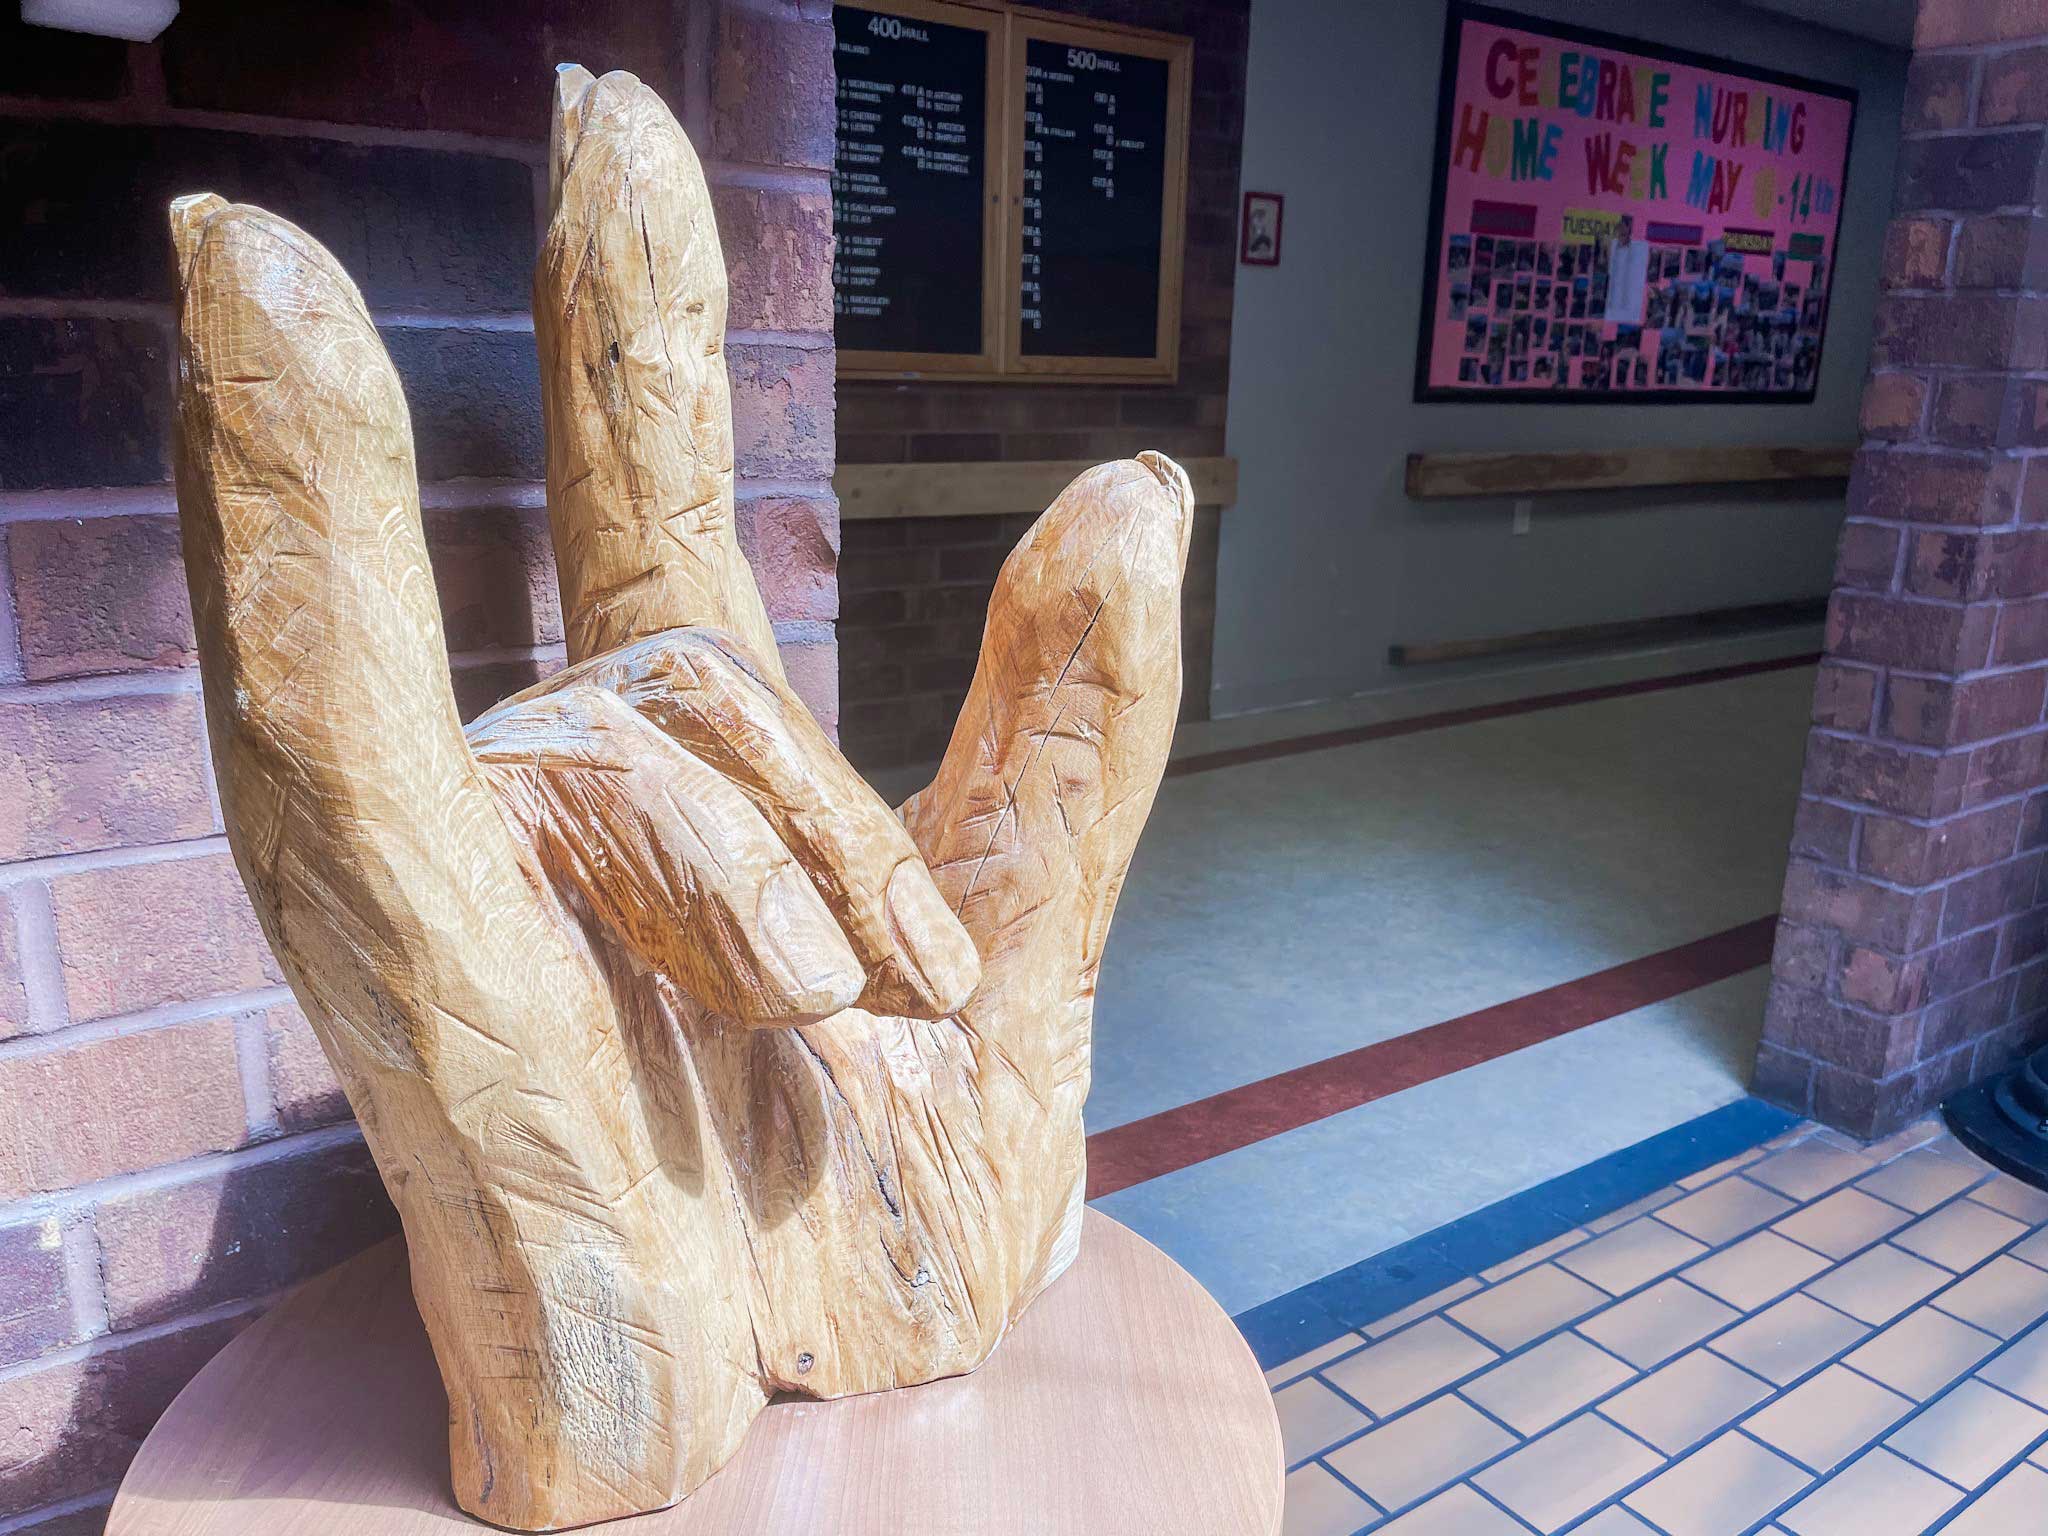 The CCEC Hand Carving Statue